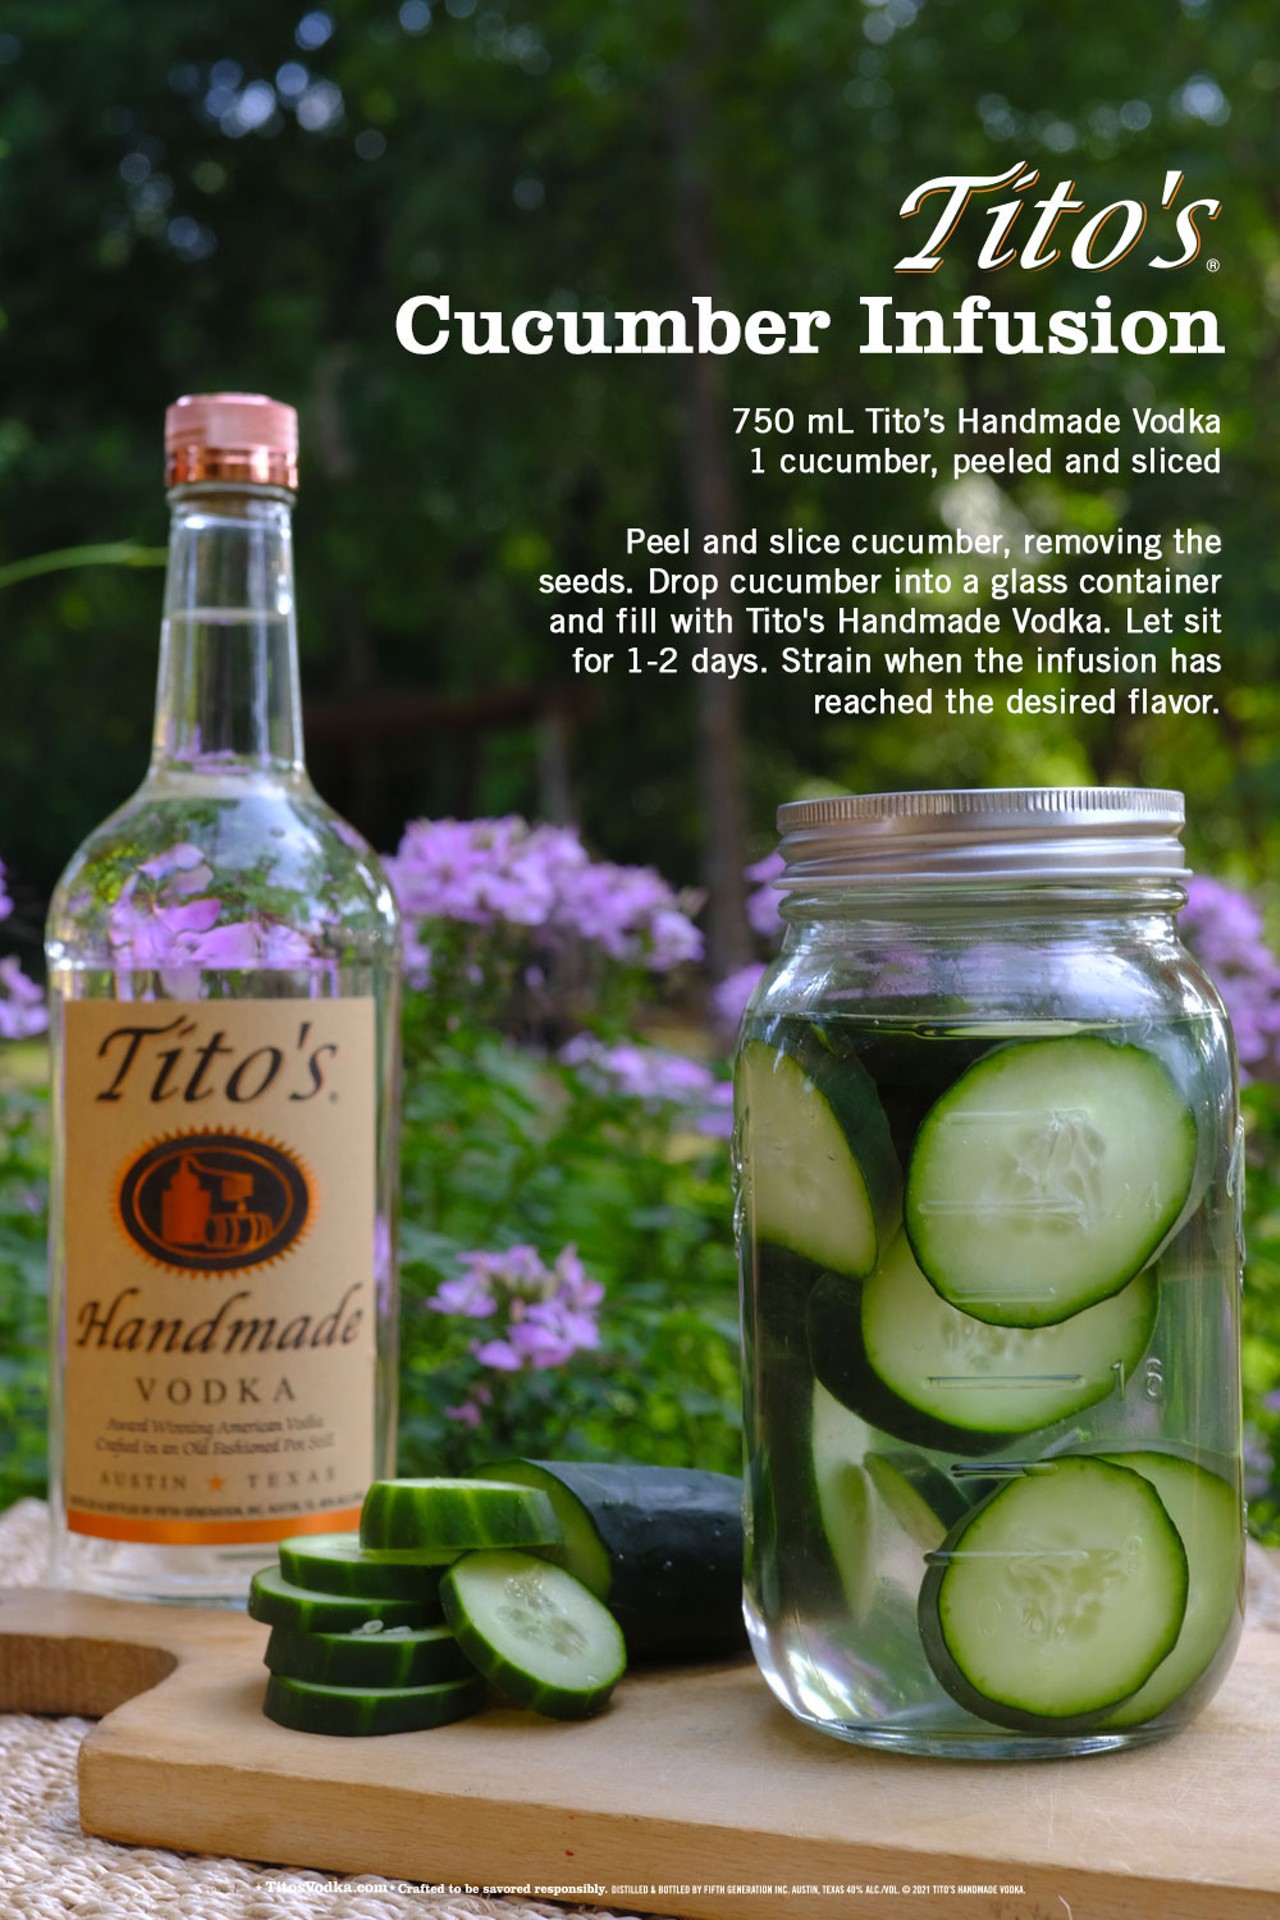 You'll Want To Try These Tito's Handmade Vodka Cocktails This Spring!